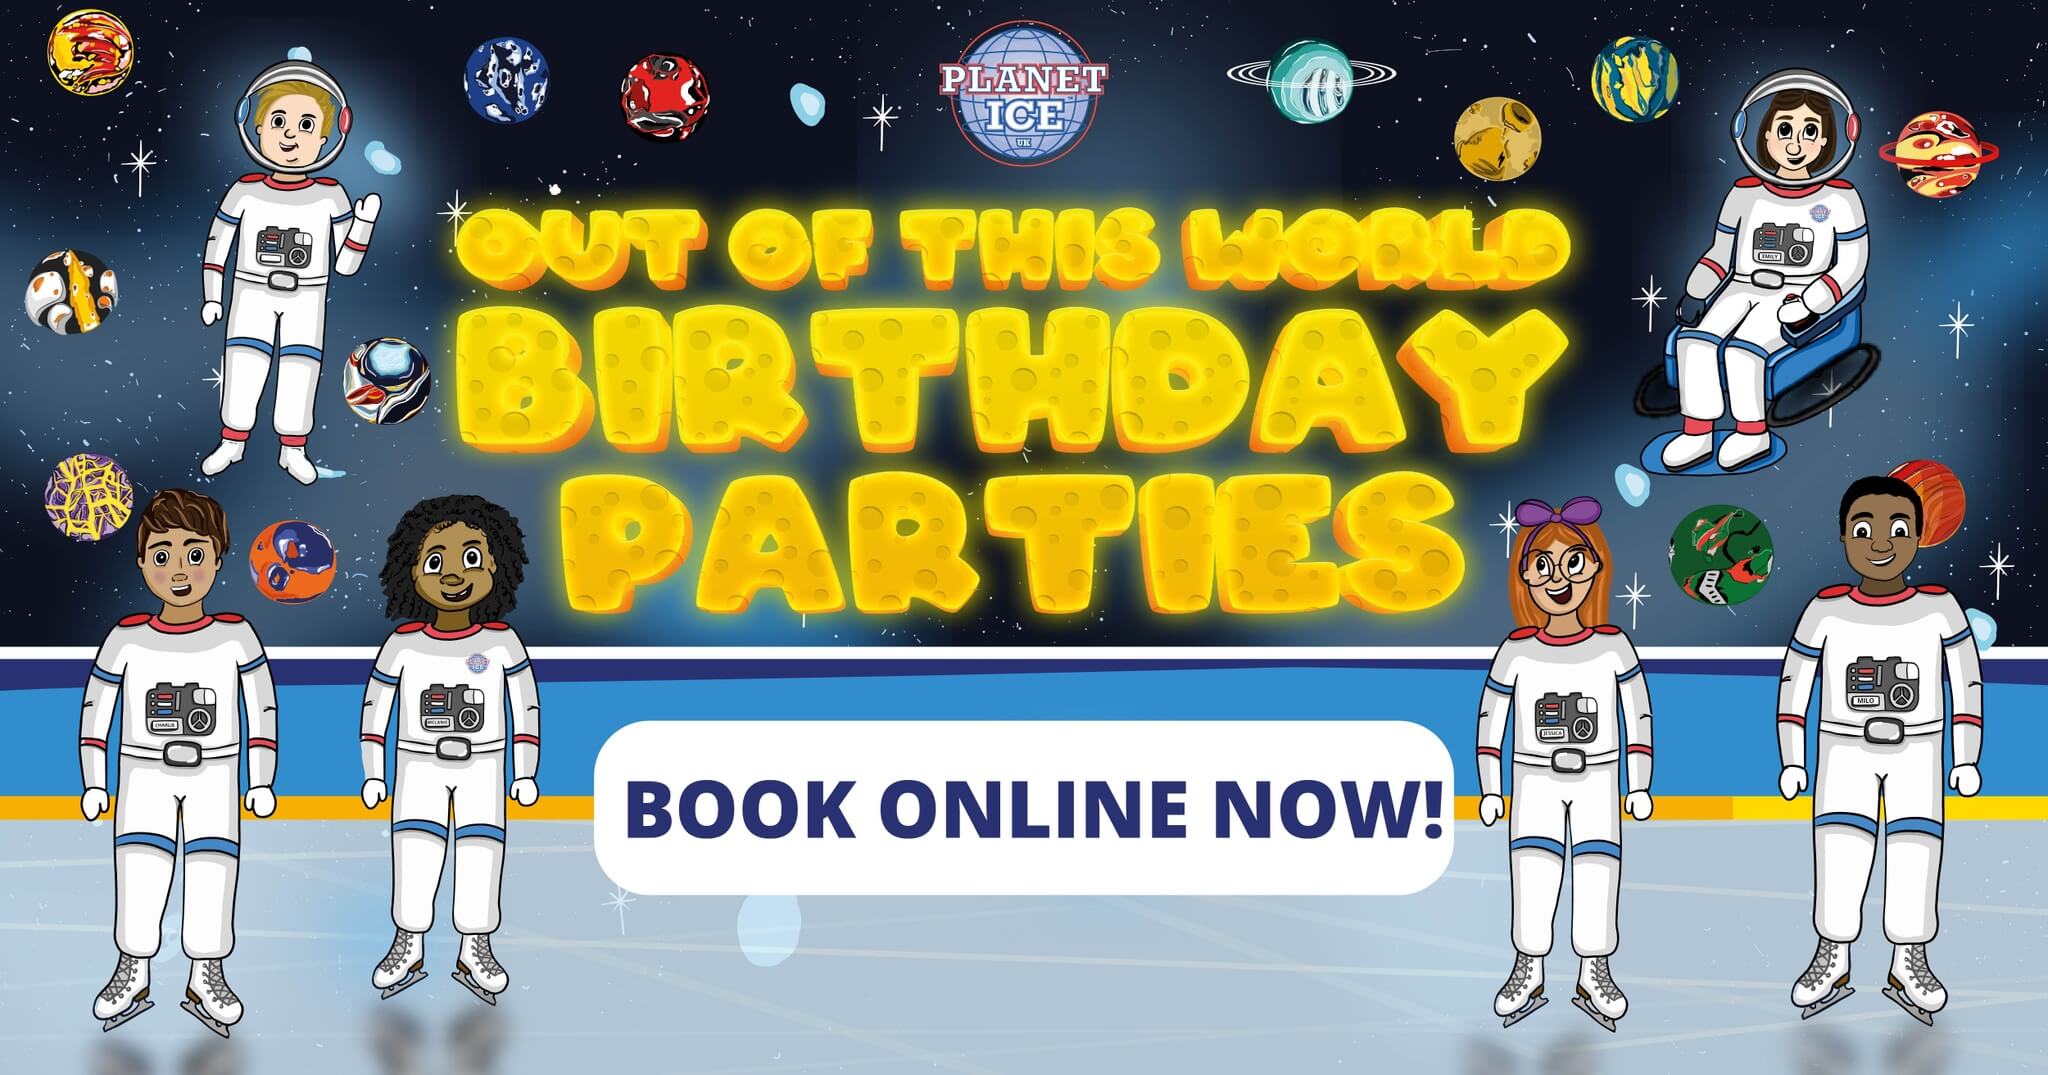 Birthday party characters for Planet Ice. 6 Characters in astronaut white suits on ice, with two floating in space with big text reading 'Out of this world birthday parties', with 'book online now' underneath.